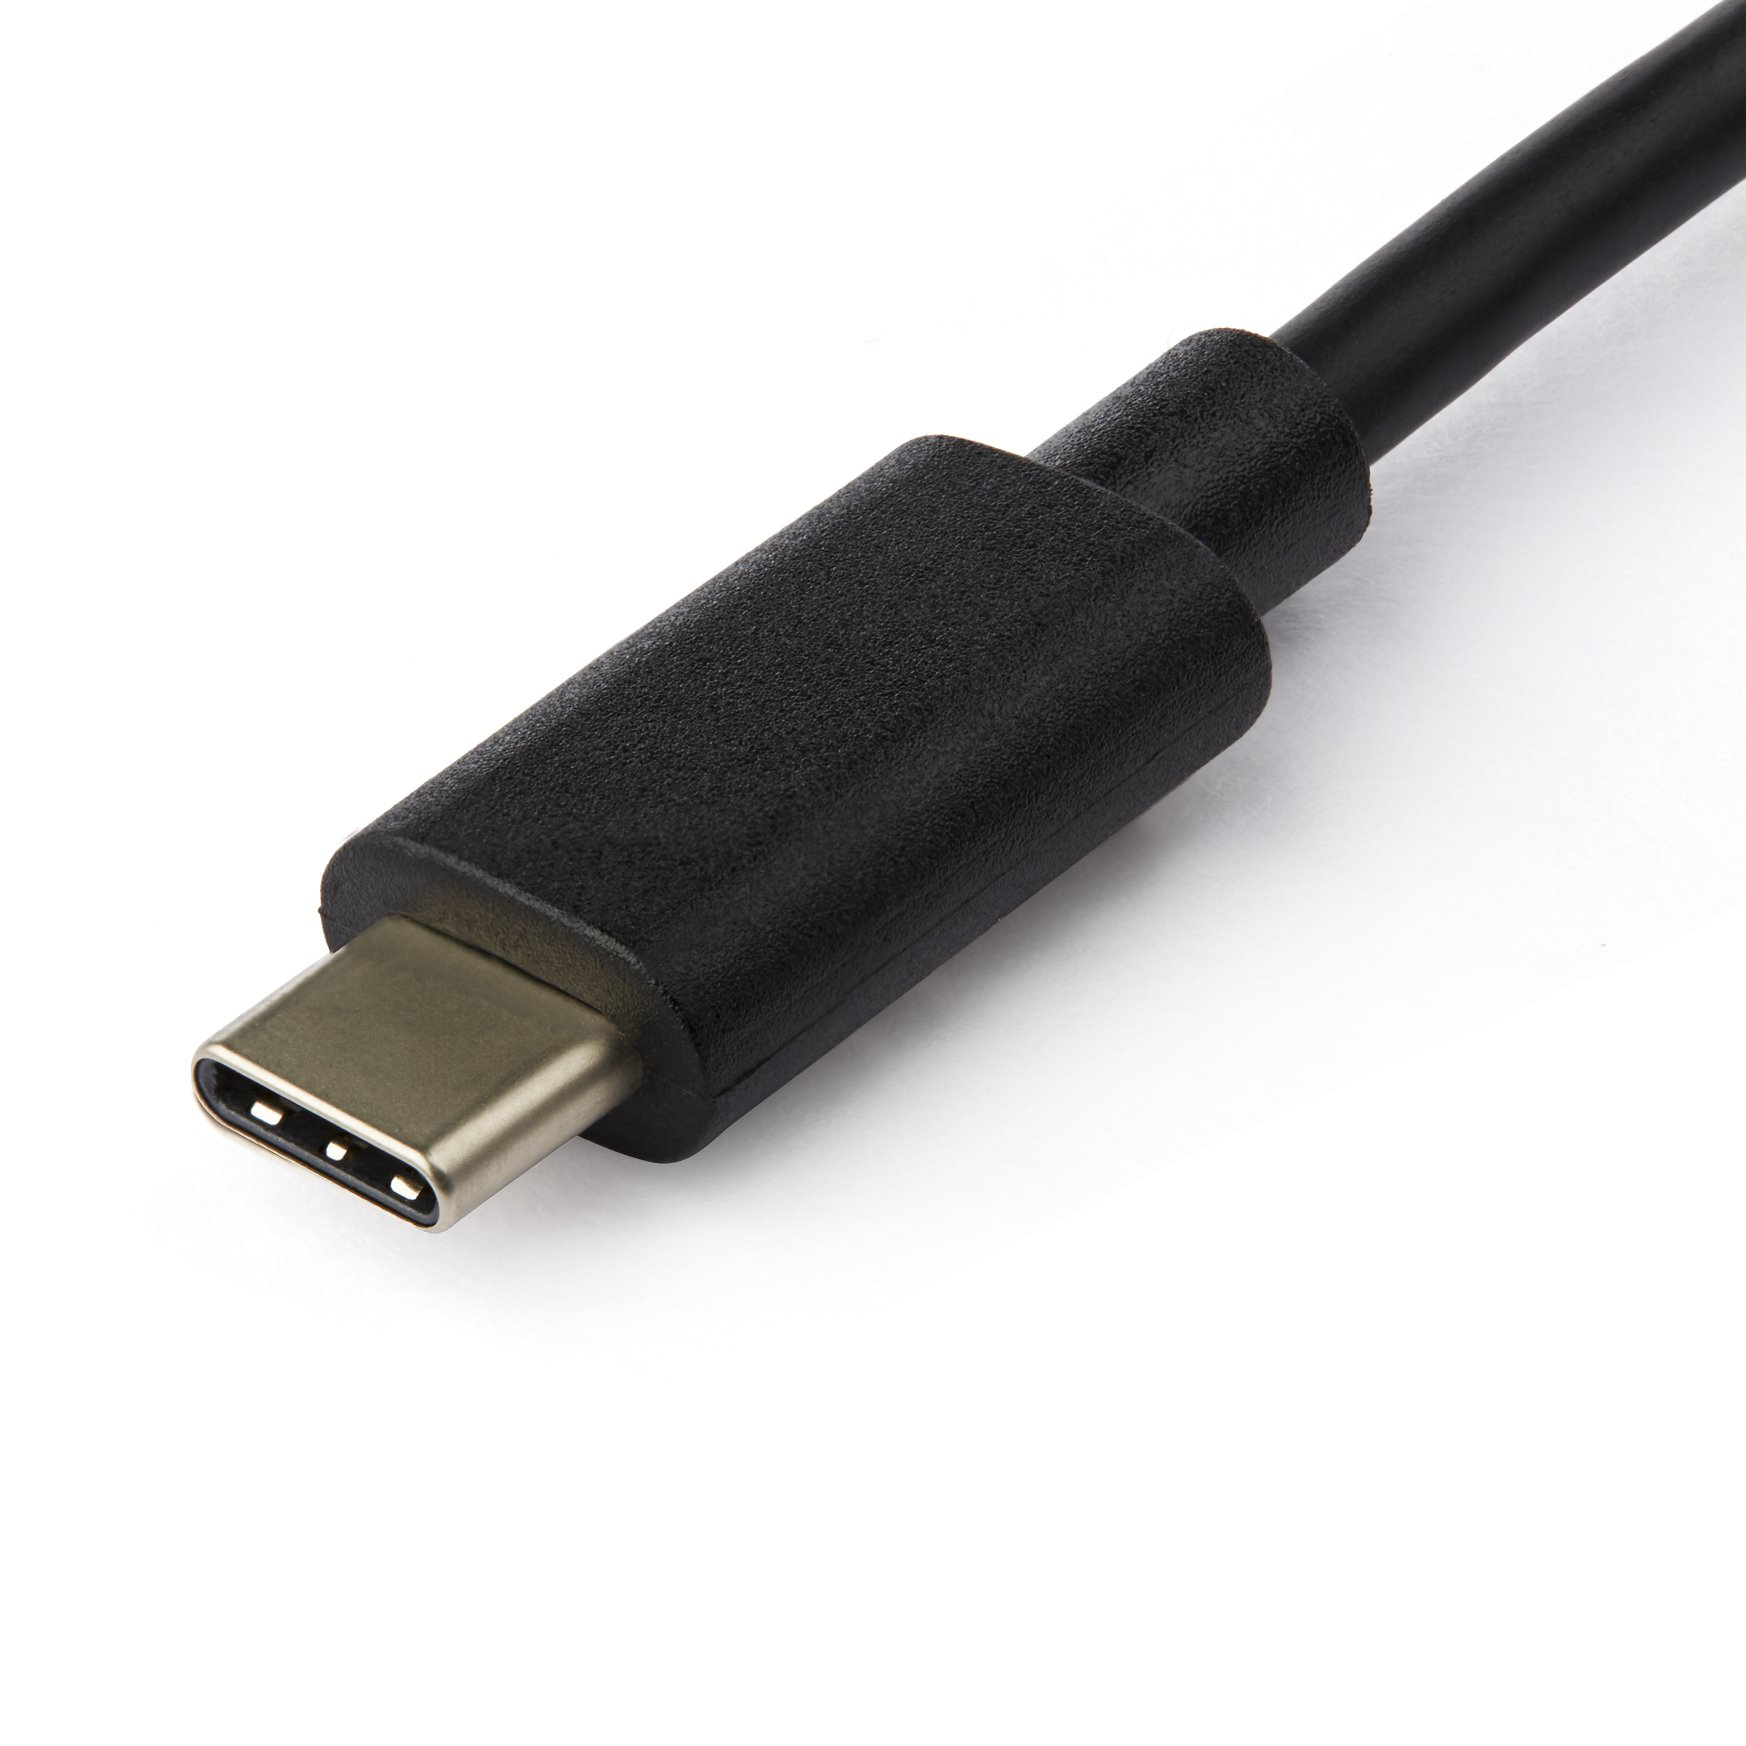 StarTech.com USB 3.1 (10Gbps) Adapter Cable for 2.5&rdquo; SATA Drives - USB-C